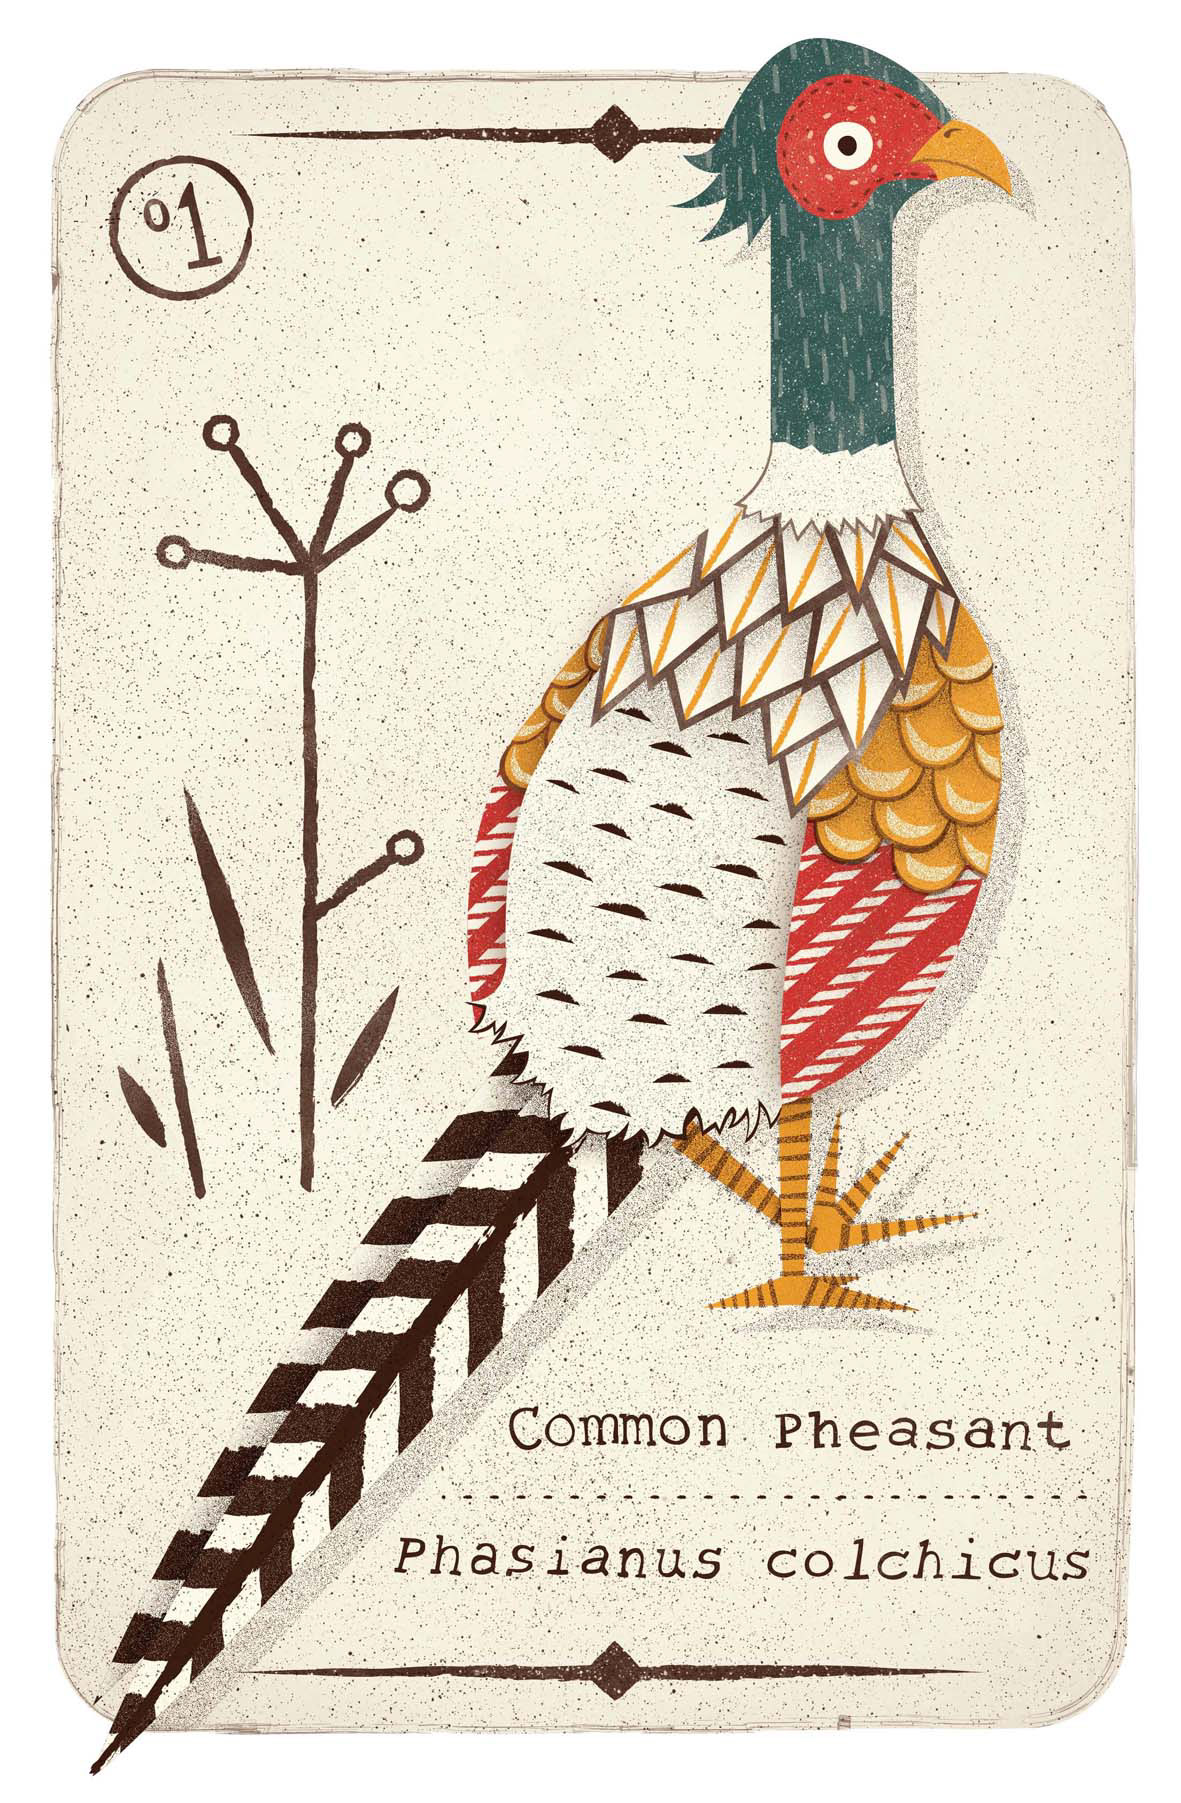 british game birds pheasant Snipe grouse red ring necked Illustrator vector norwich joe mclean